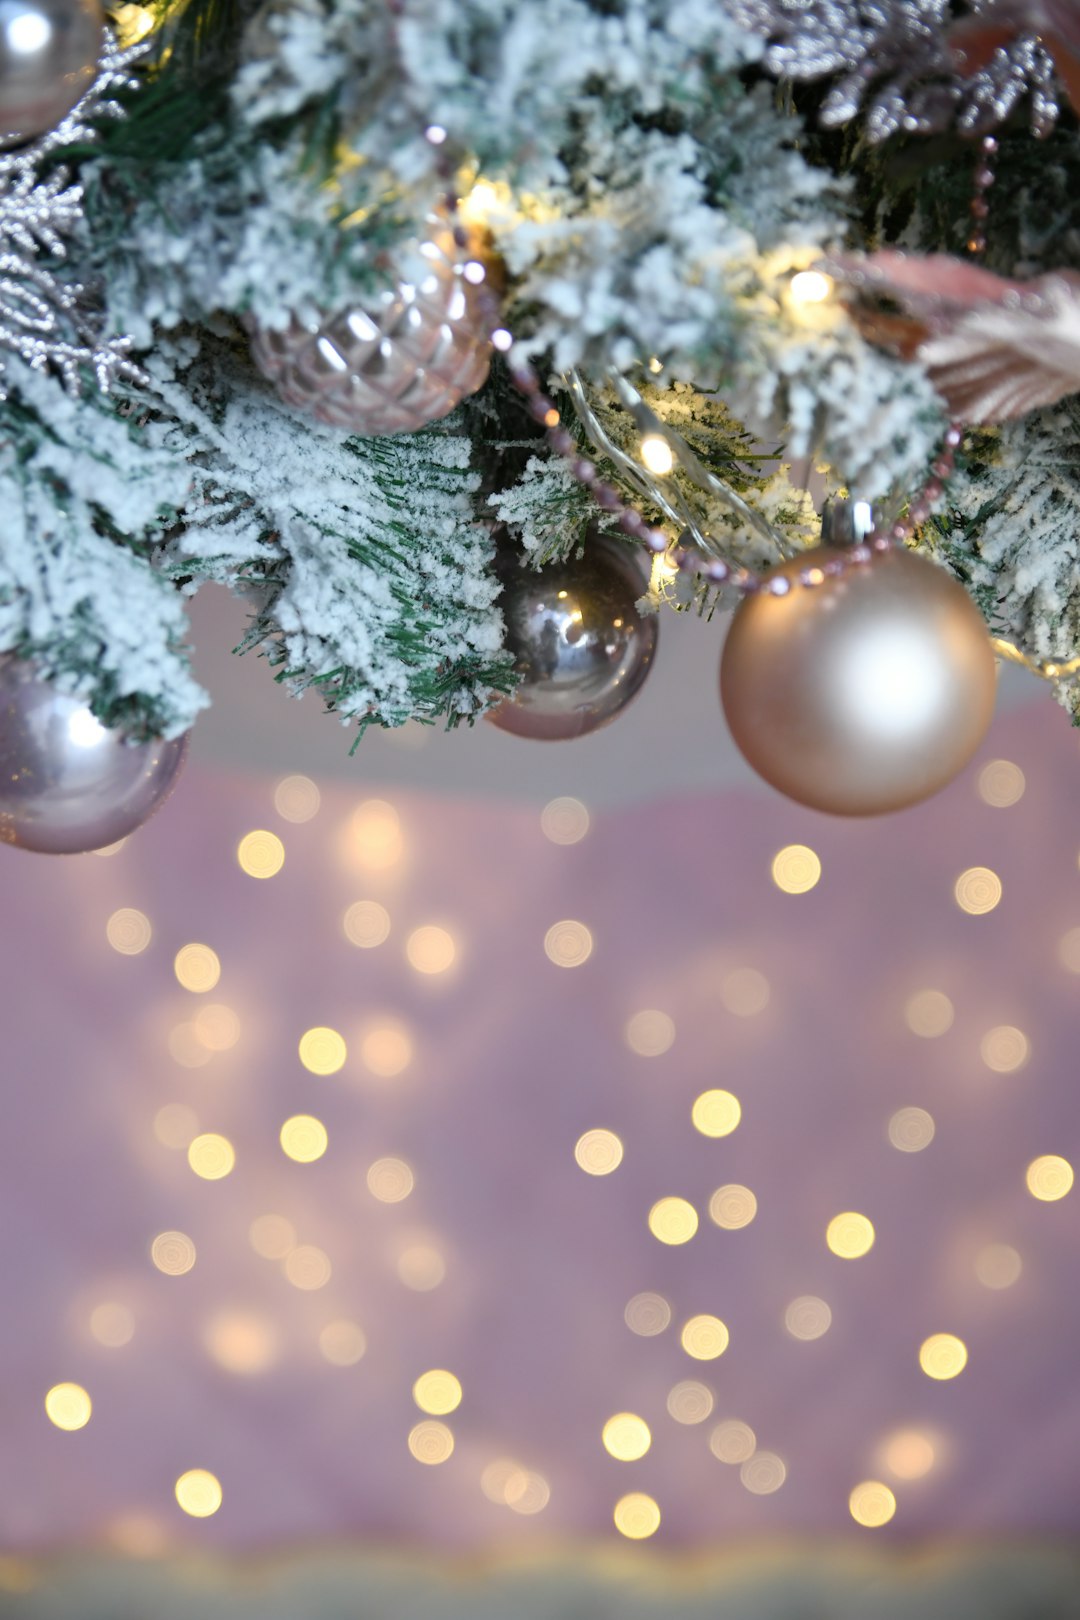 green pine tree with white snow flakes and white and yellow bokeh lights